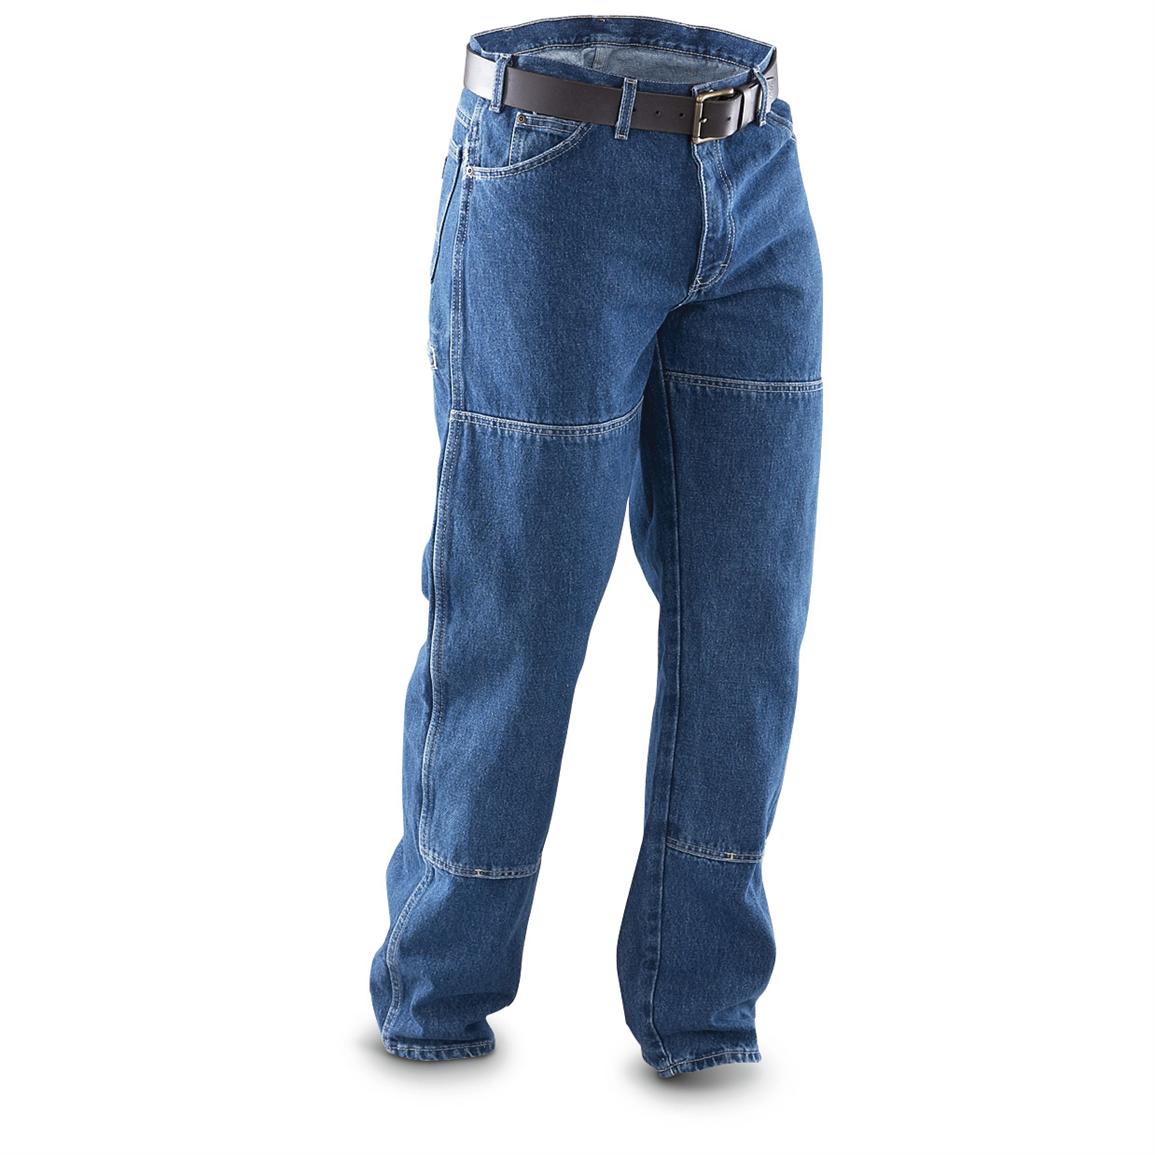 Dickies® Workhorse Double-knee Jeans, Stonewash - 300802, Jeans & Pants ...